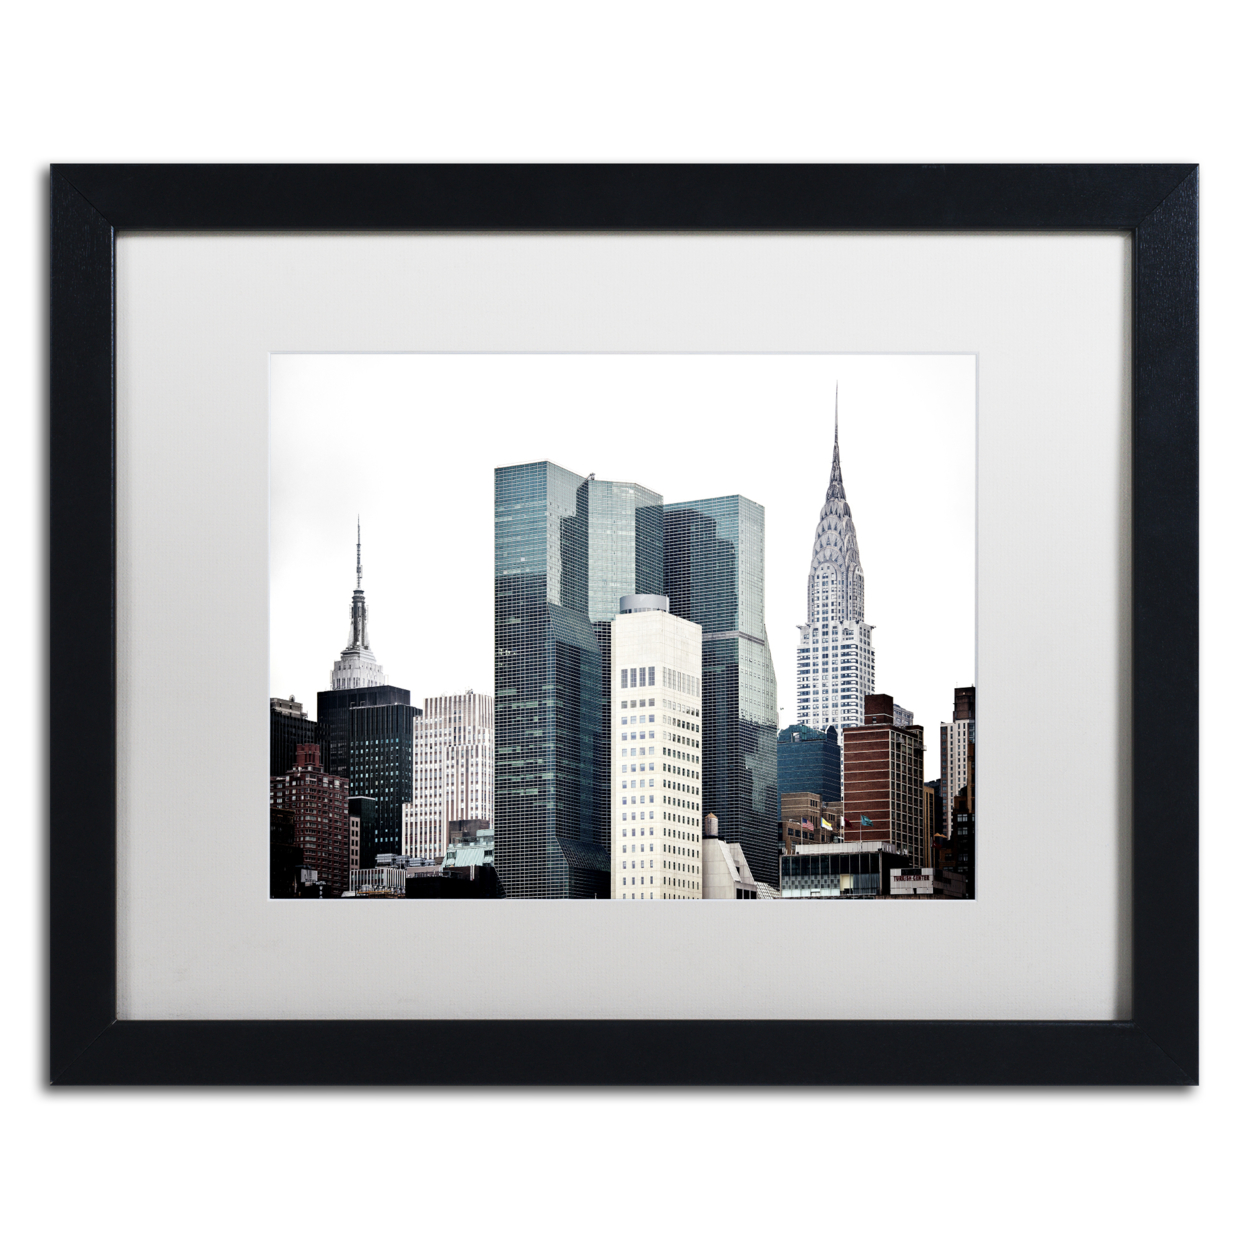 Philippe Hugonnard 'New York Architecture' Black Wooden Framed Art 18 X 22 Inches